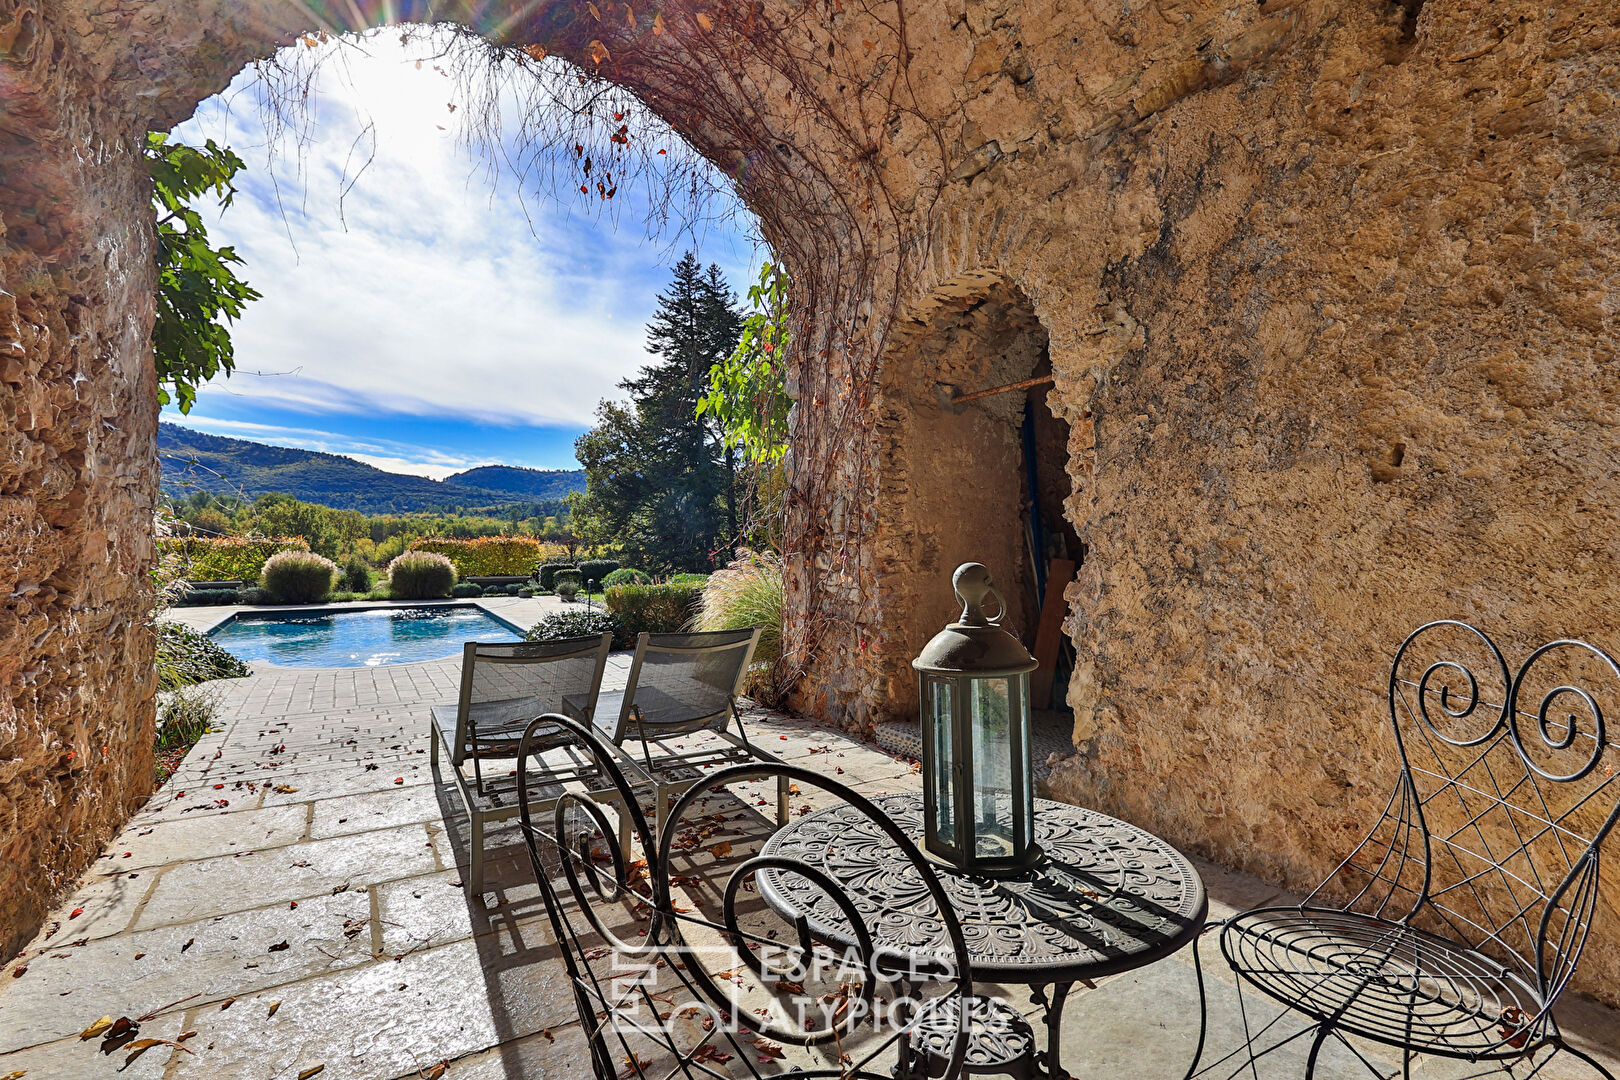 Exceptional castle, its outbuildings and its vineyard in Provence